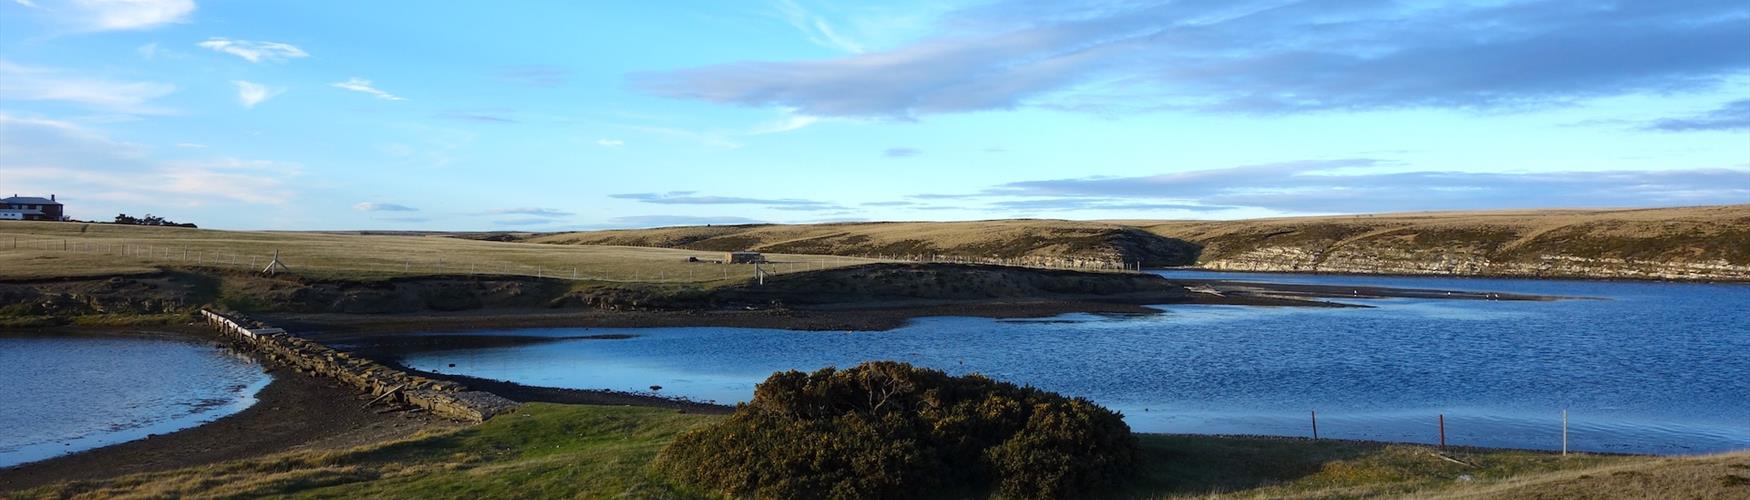 Great fishing locations in the Falkland Islands